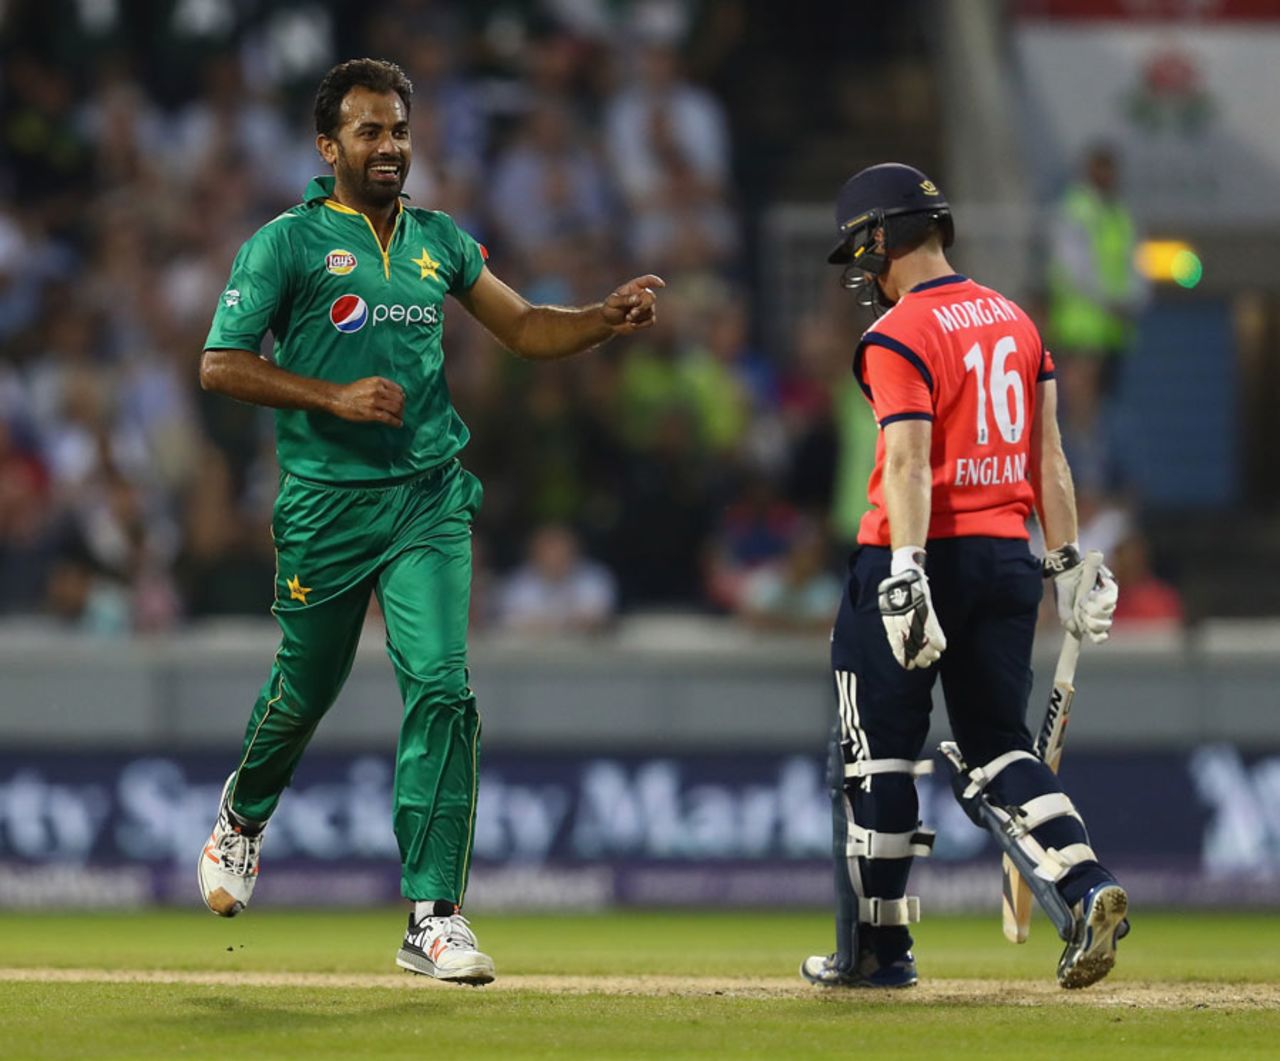 Wahab Riaz removes Eoin Morgan, England v Pakistan, only T20, Old Trafford, September 7, 2016